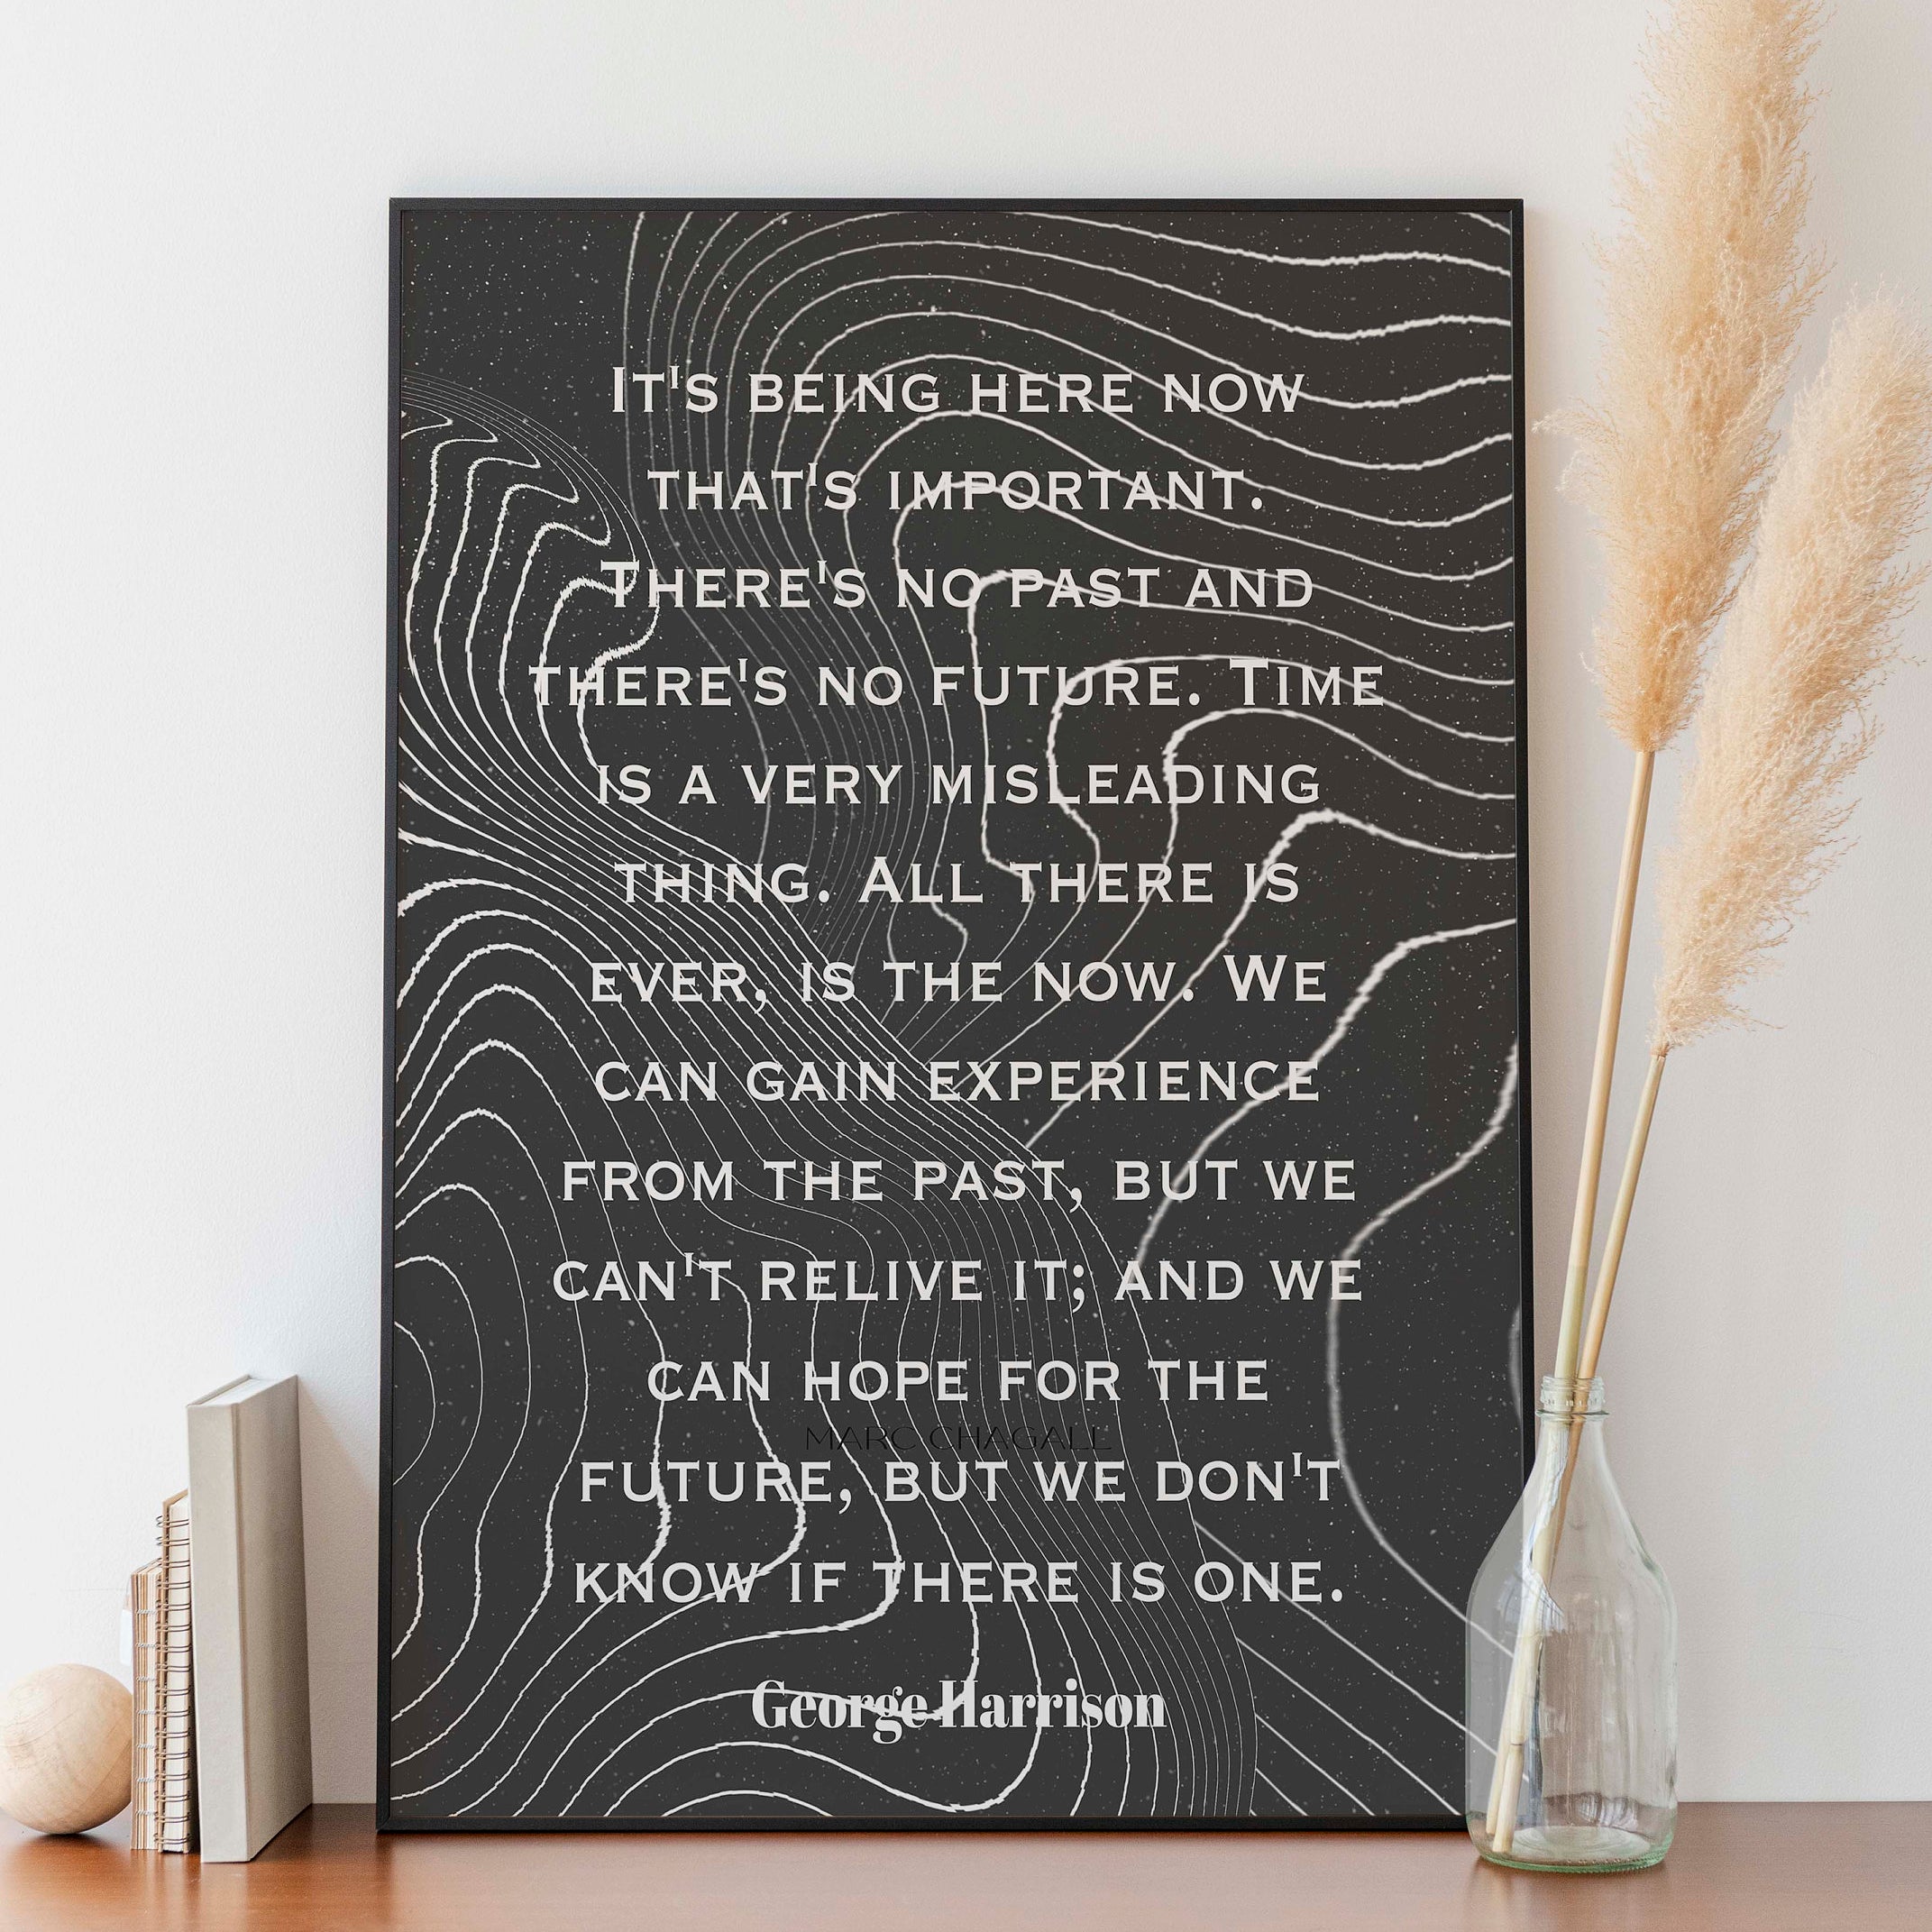 George Harrison Being Here Now Quote Wall Art Prints, Unframed Modern Abstract Mindfulness Inspirational Wall Decor in Black & White